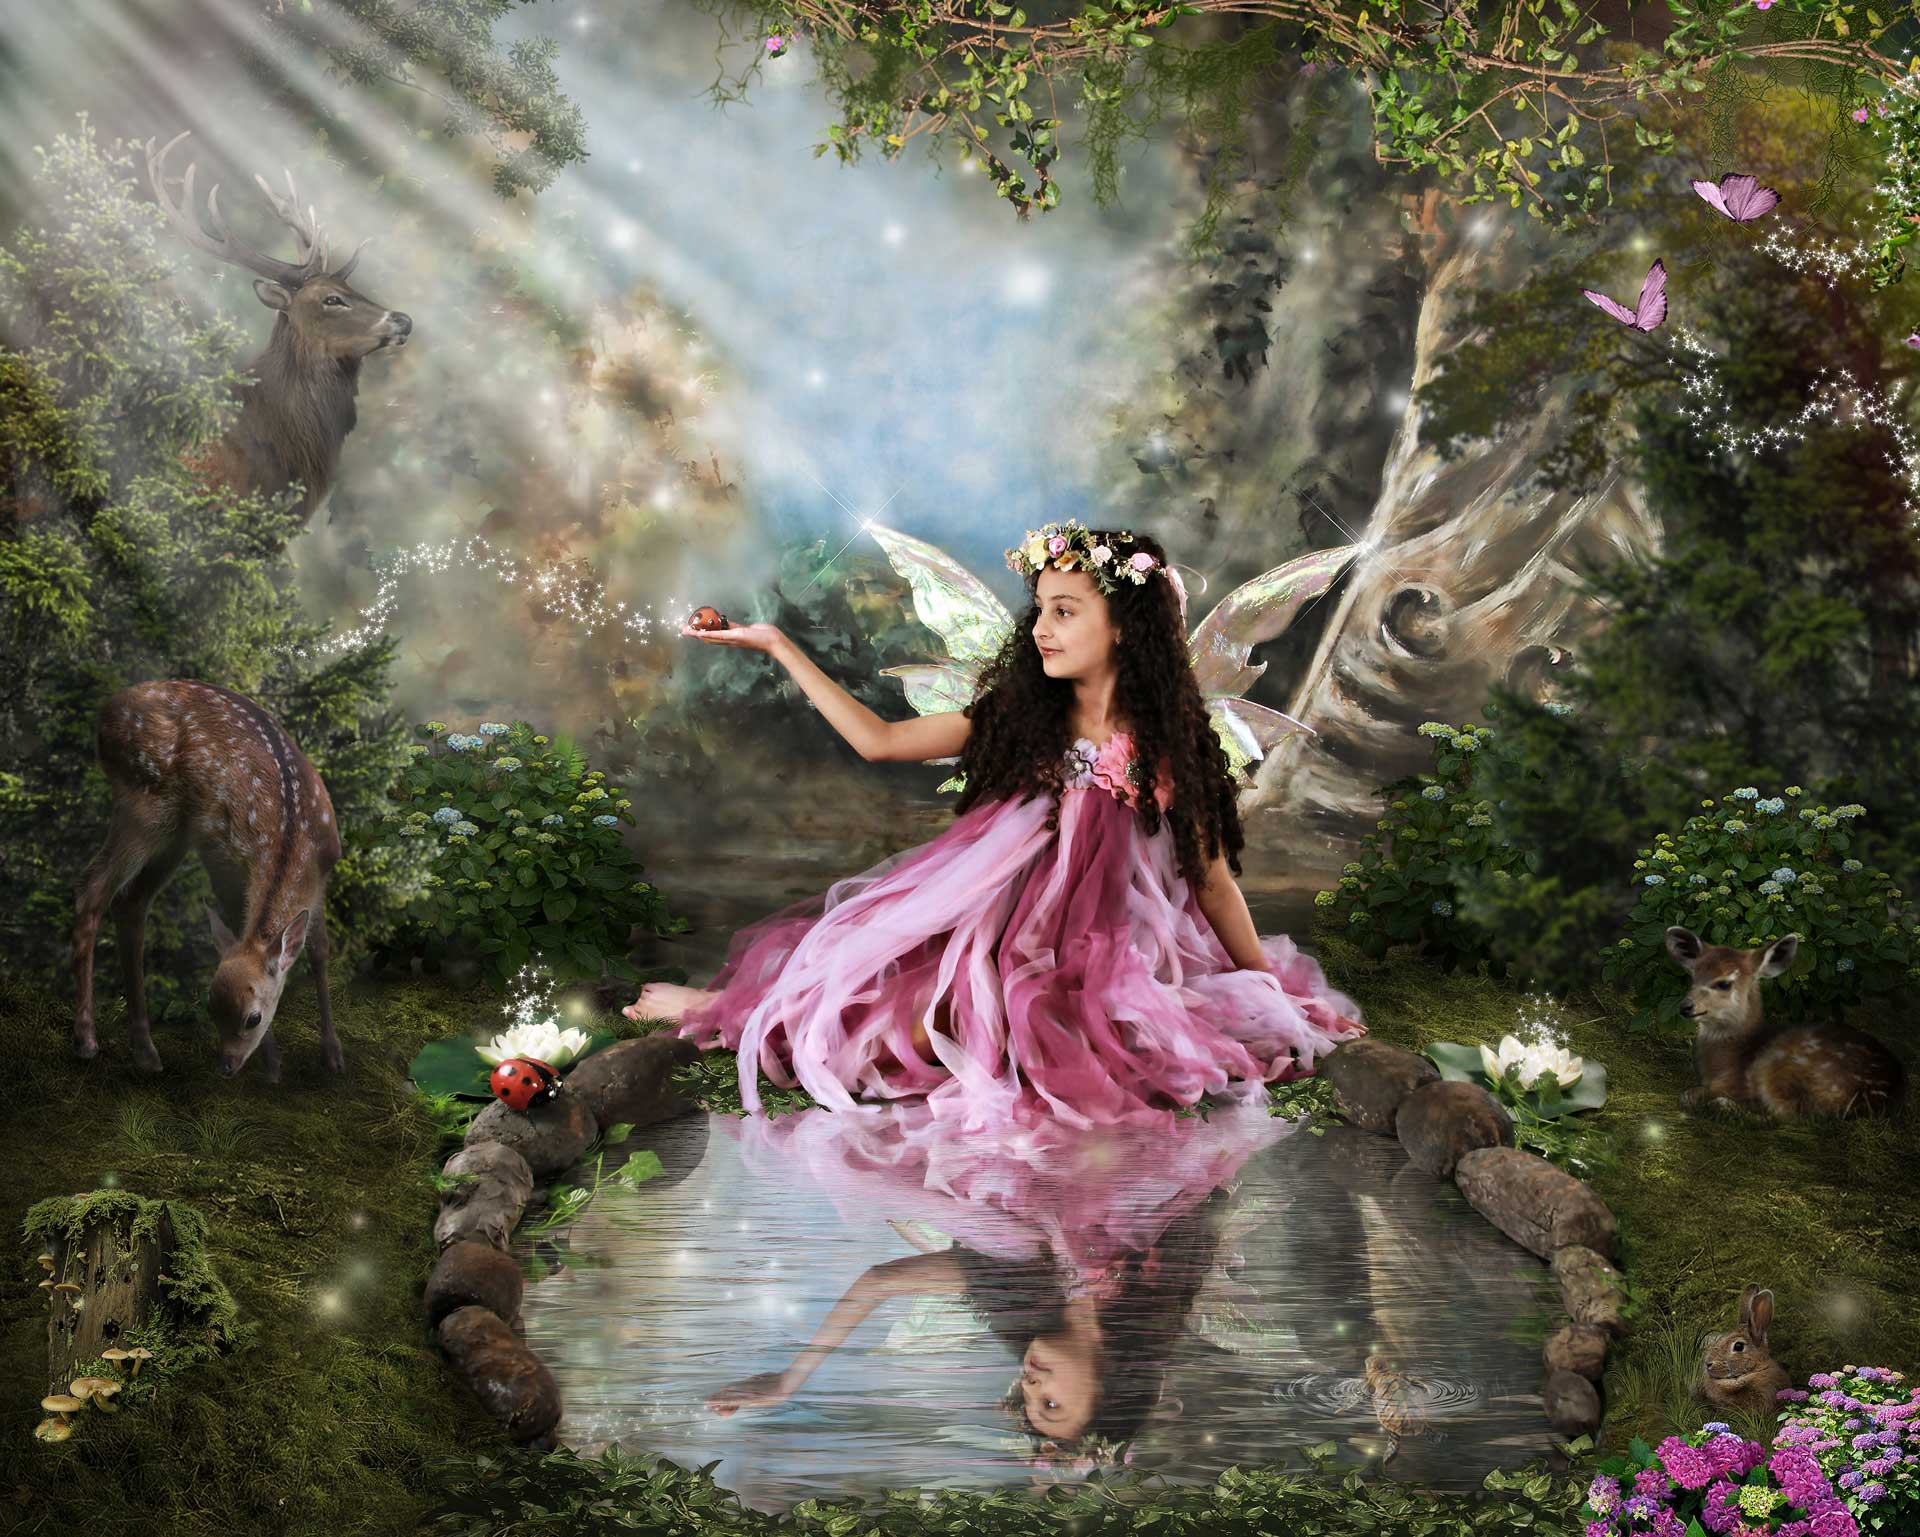 Girl with fairy wings by a pond in a magical forest